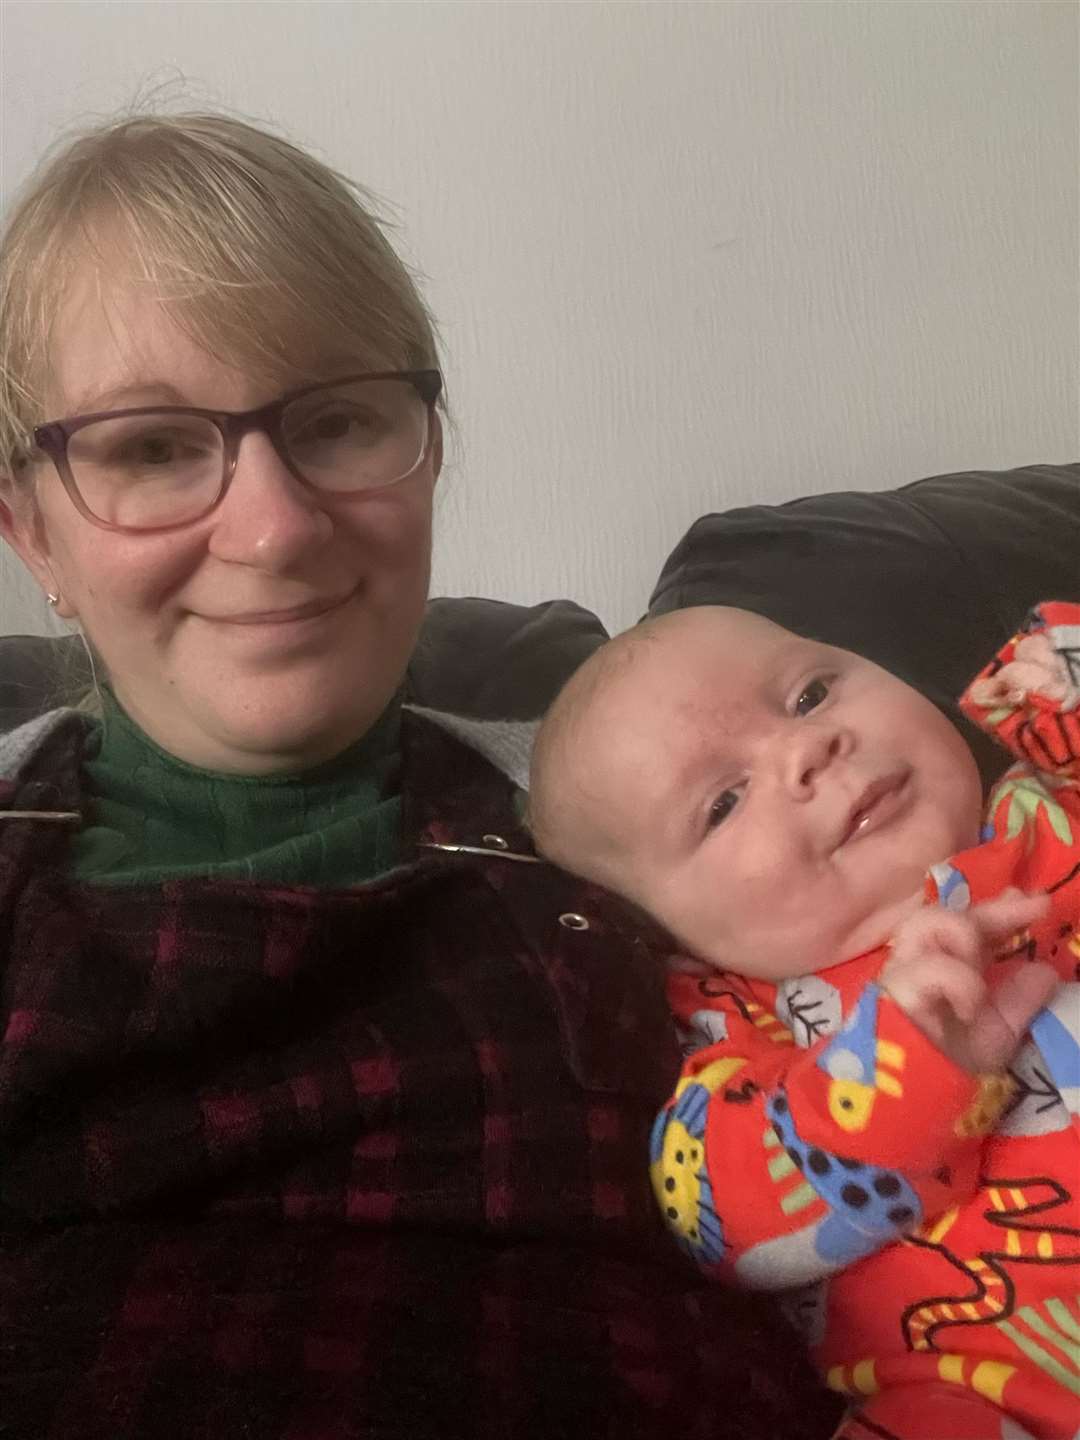 Caithness mother-of-three Emma Curran (36) with her youngest who was born in February this year. She said that nothing has improved since she gave birth to her two older sons who are now 9 and 7.